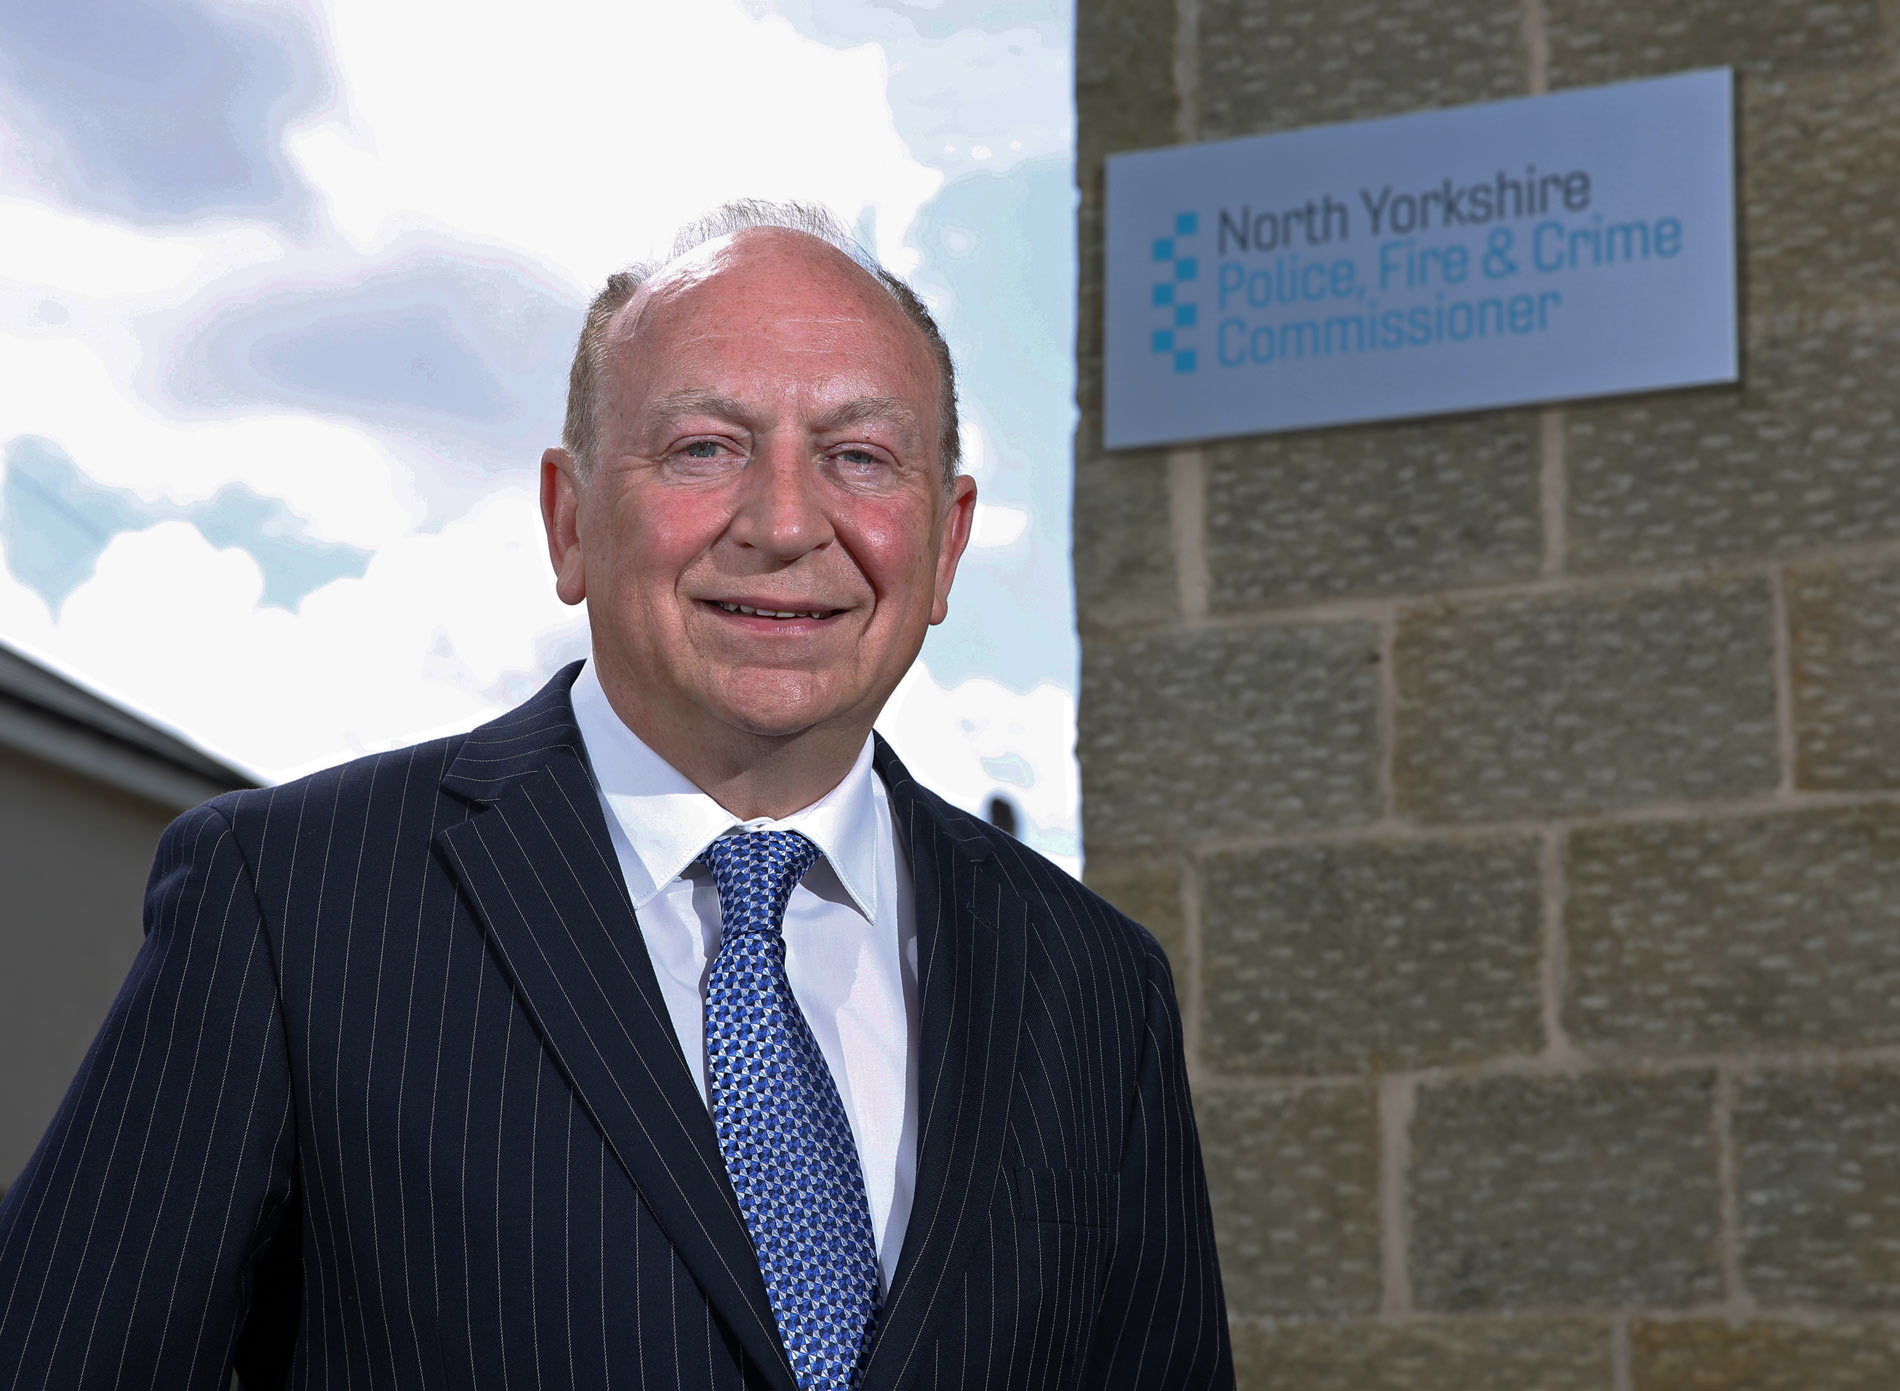 North Yorkshire Police, Fire and Crime Commissioner Philip AllottNorth Yorkshire Police, Fire and Crime Commissioner Philip Allott